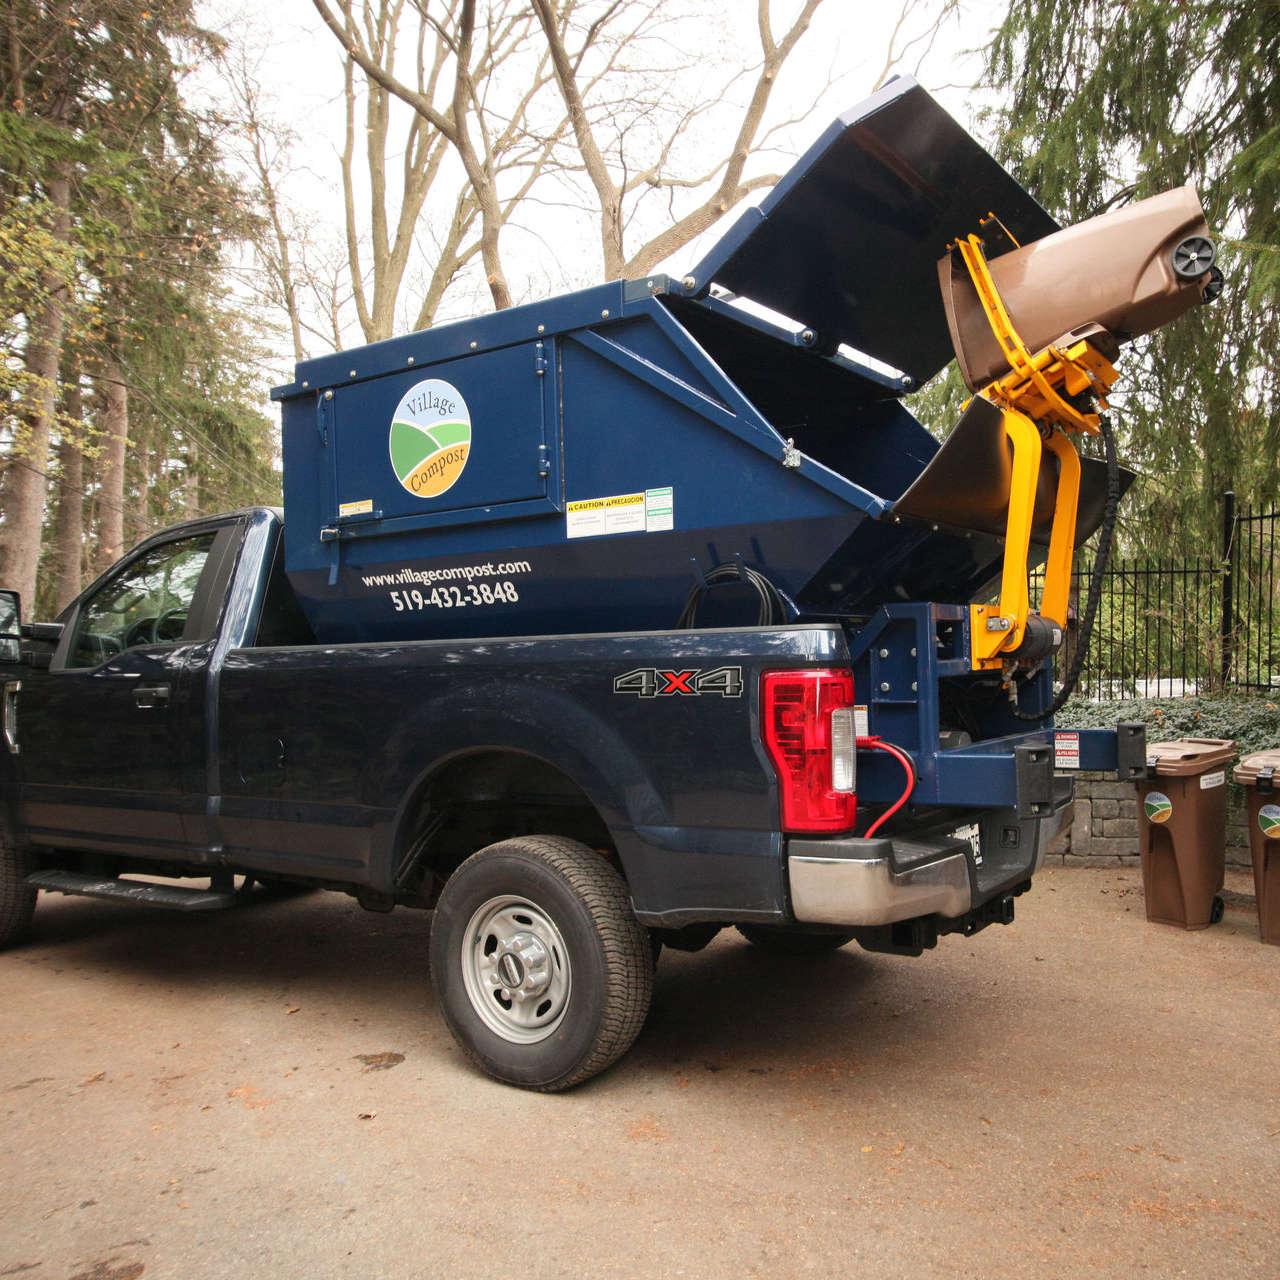 A Village Compost Limited compost pick-up truck collecting compost from a lifted bin - Village Compost - Compost Pick-Up Services & More - London, Ontario.